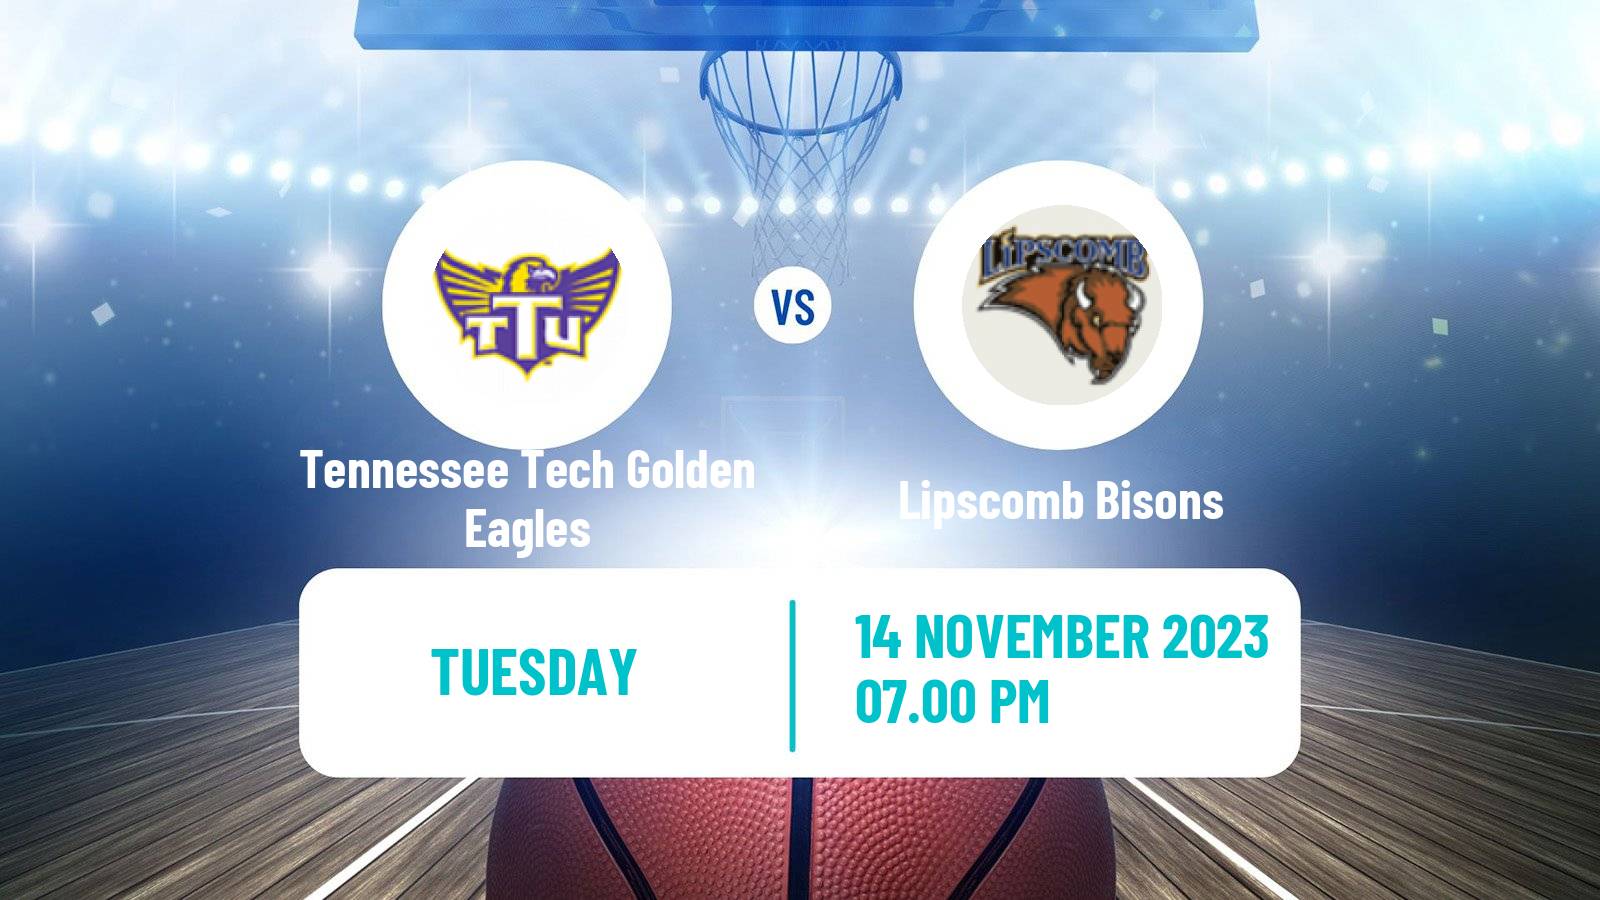 Basketball NCAA College Basketball Tennessee Tech Golden Eagles - Lipscomb Bisons